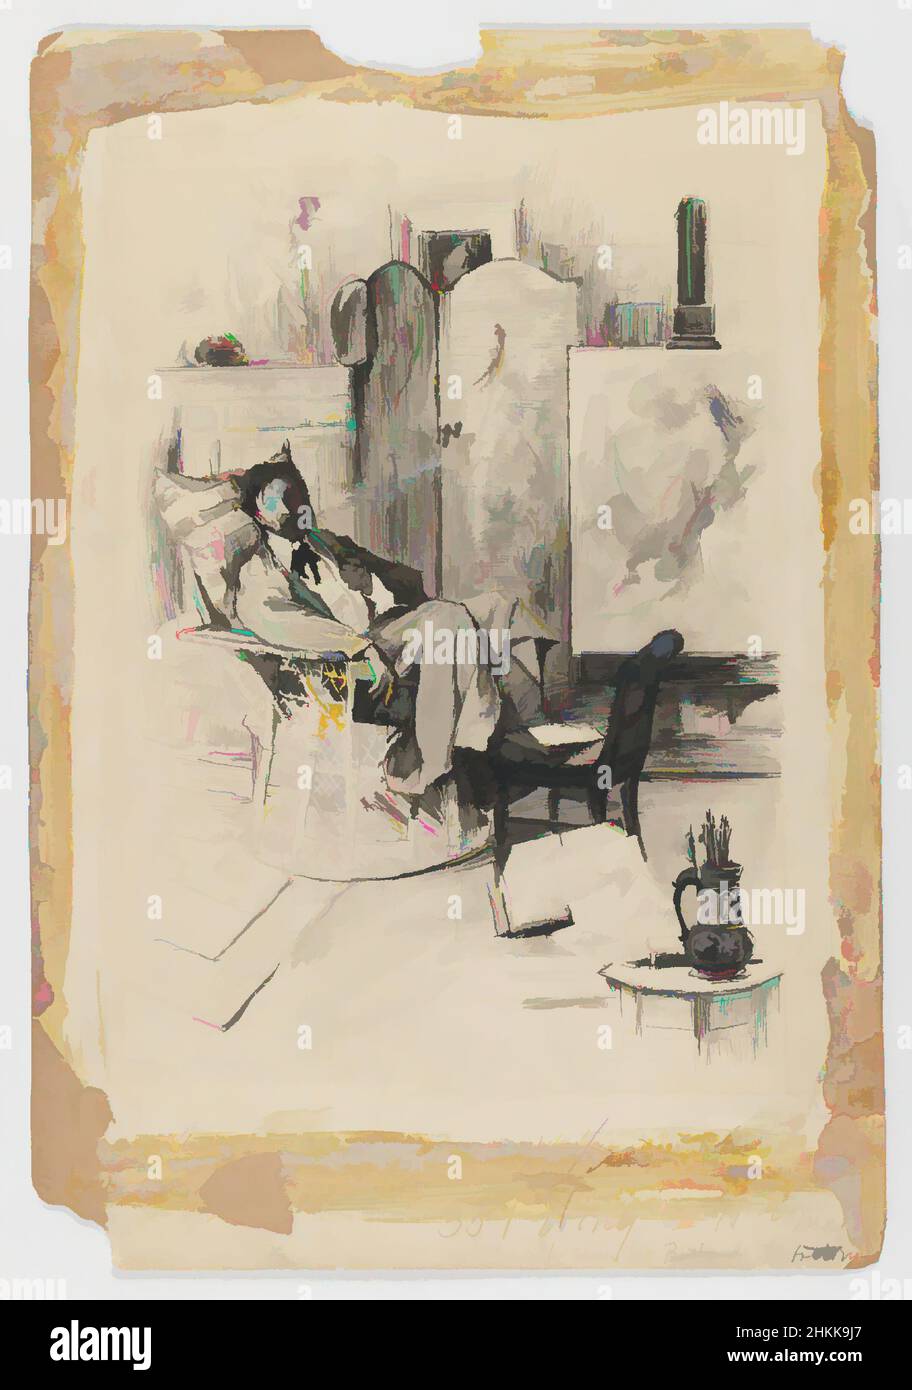 Art inspired by Self-Portrait in Studio, Thomas Fogarty, American, 1873-1938, Graphite and ink wash with touches of Chinese white on paper mounted to paperboard, n.d., Sheet: 14 1/2 x 10 in., 36.8 x 25.4 cm, Classic works modernized by Artotop with a splash of modernity. Shapes, color and value, eye-catching visual impact on art. Emotions through freedom of artworks in a contemporary way. A timeless message pursuing a wildly creative new direction. Artists turning to the digital medium and creating the Artotop NFT Stock Photo